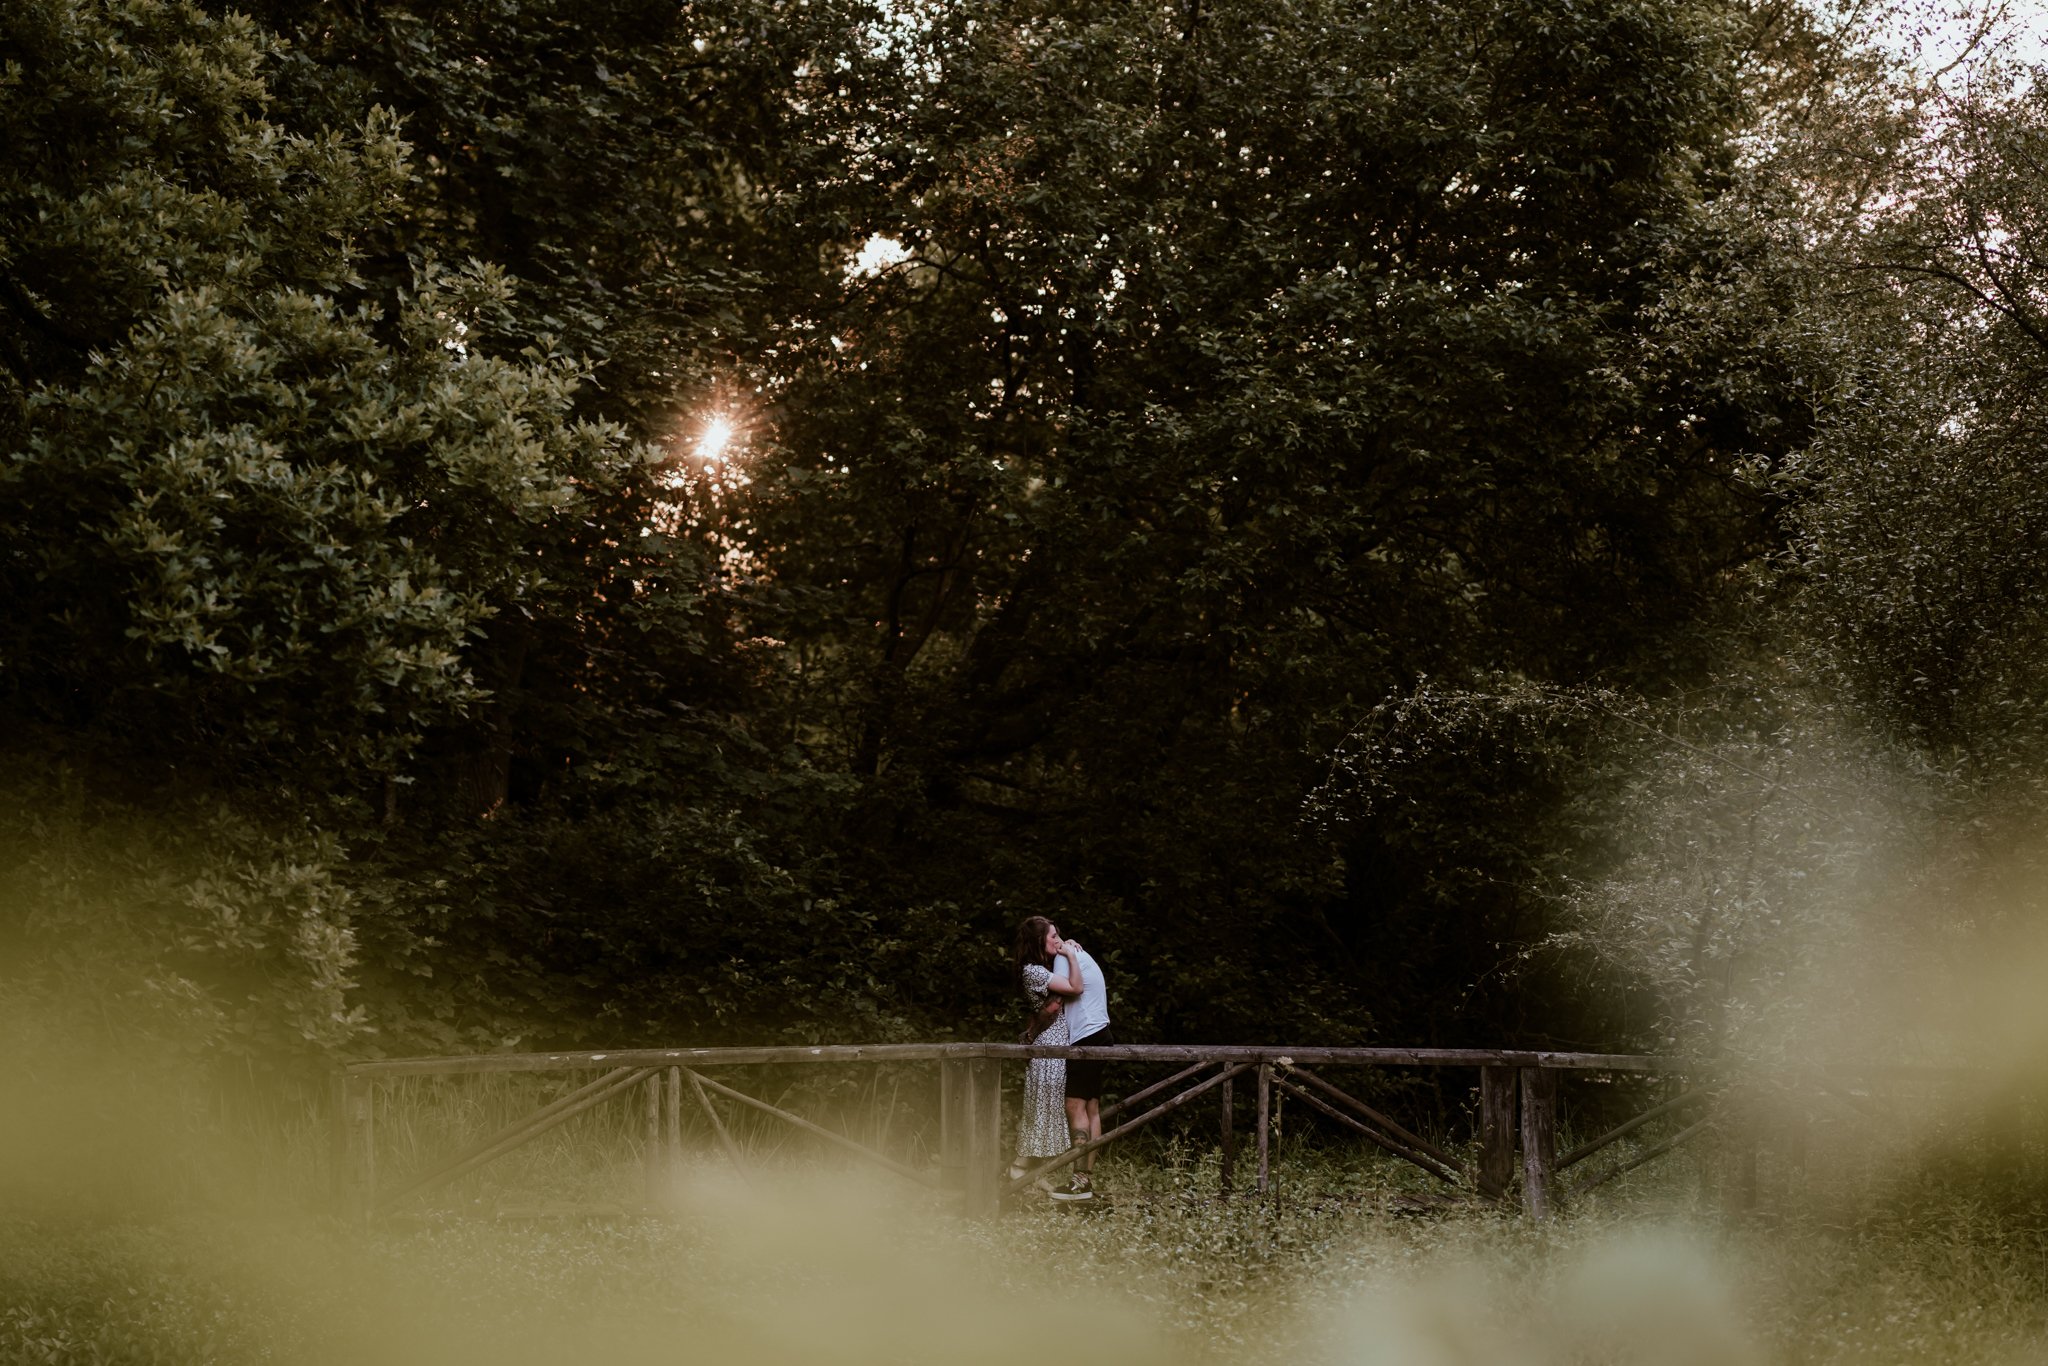 Angus Scotland Engagement and Wedding Photographer - Emily and Gabriel - Adventure Couple Session63.jpg